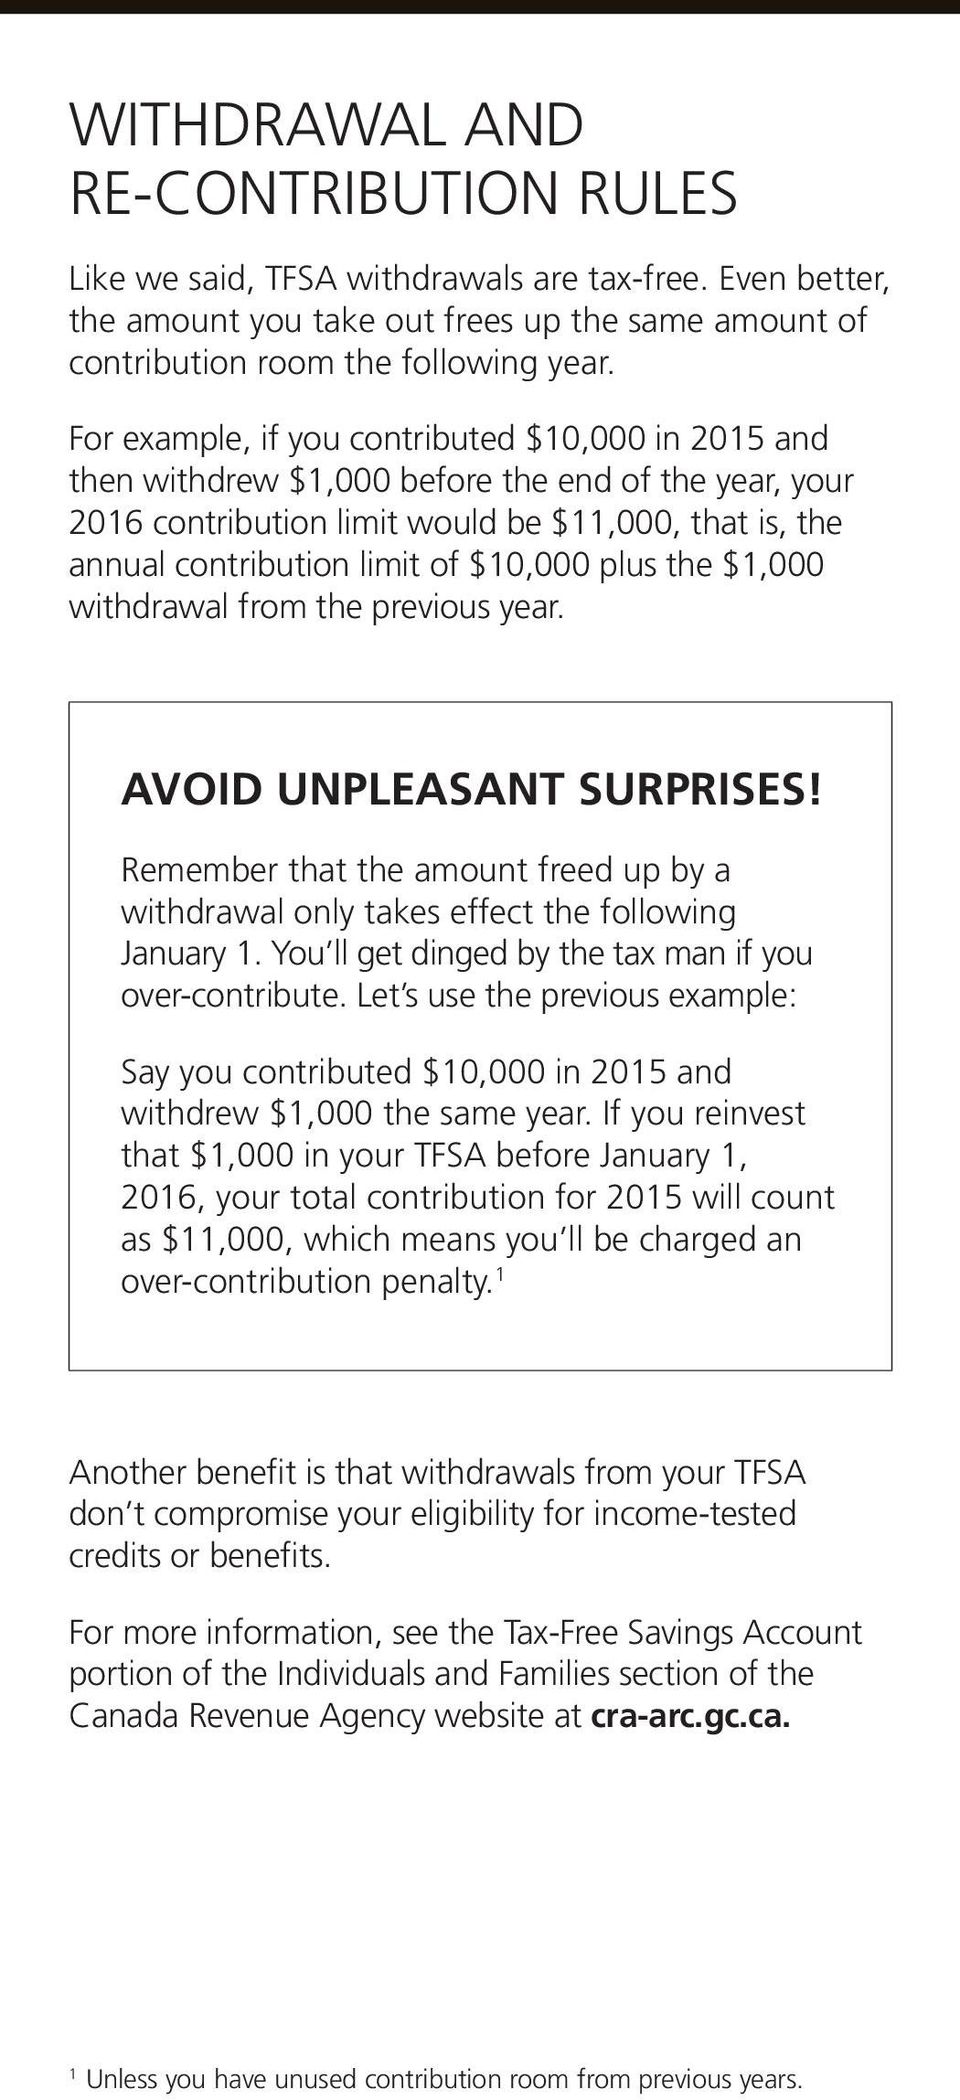 plus the $1,000 withdrawal from the previous year. AVOID UNPLEASANT SURPRISES! Remember that the amount freed up by a withdrawal only takes effect the following January 1.